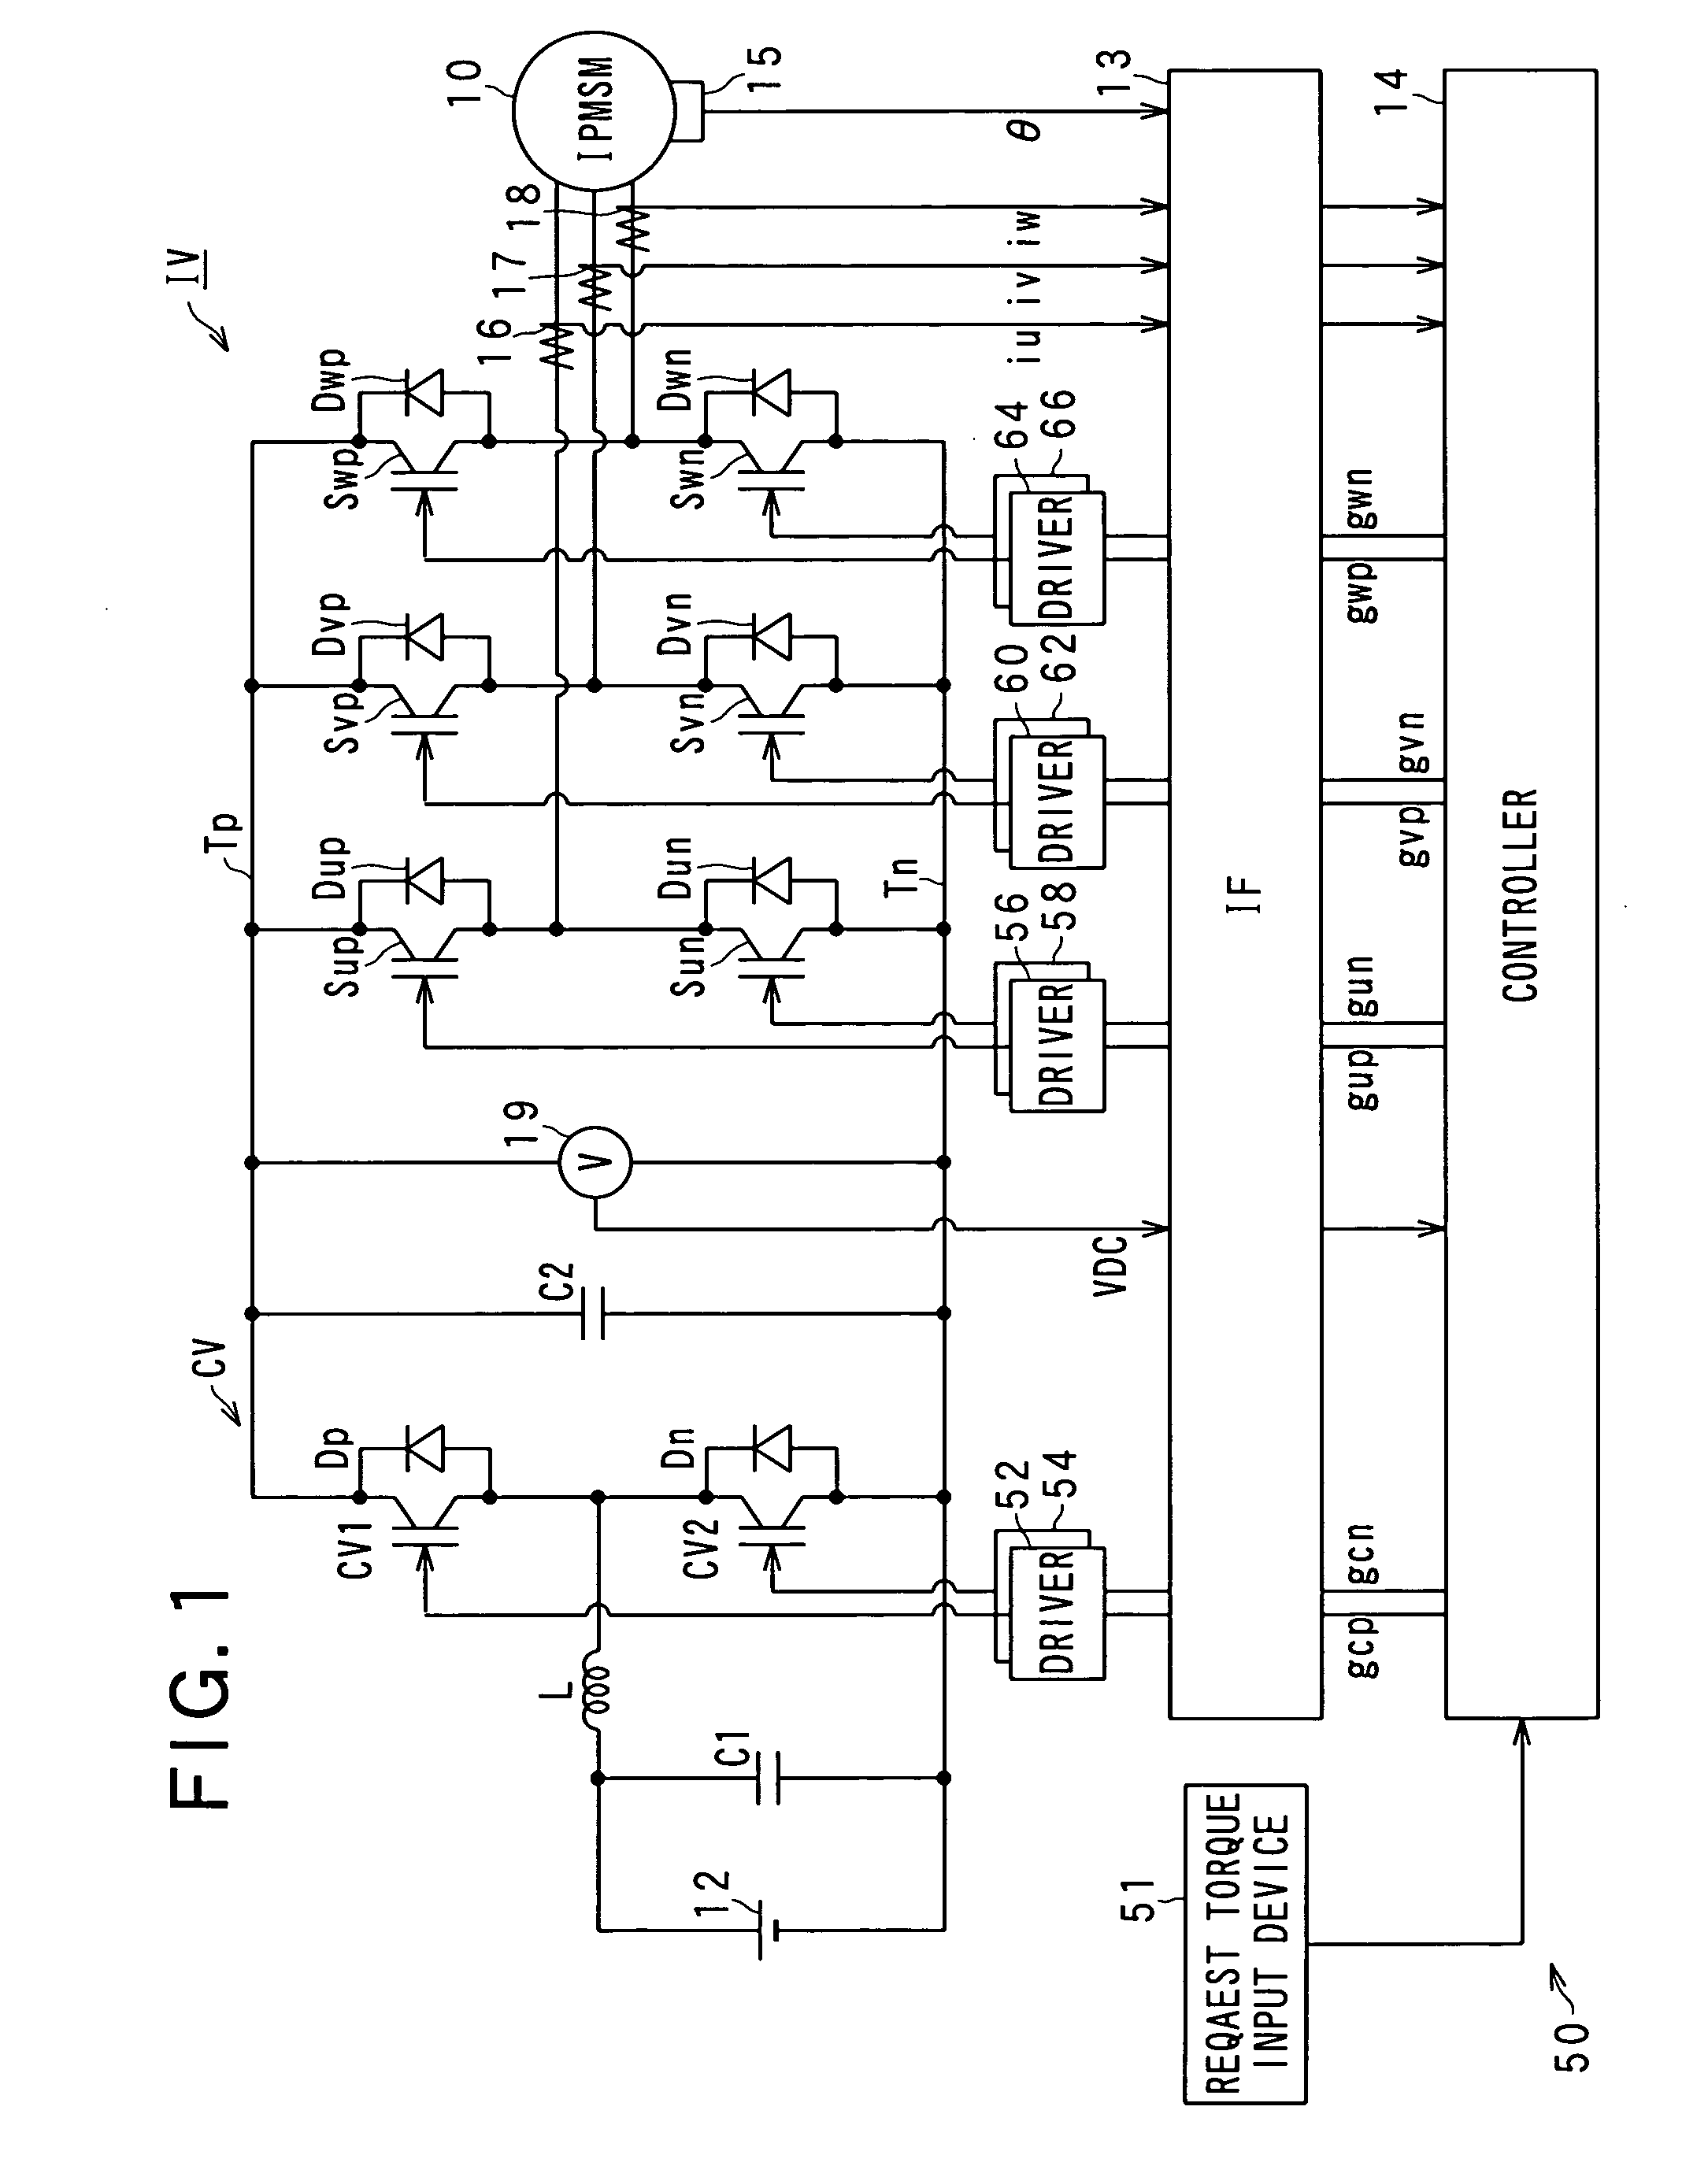 Apparatus for carrying out improved control of rotary machine